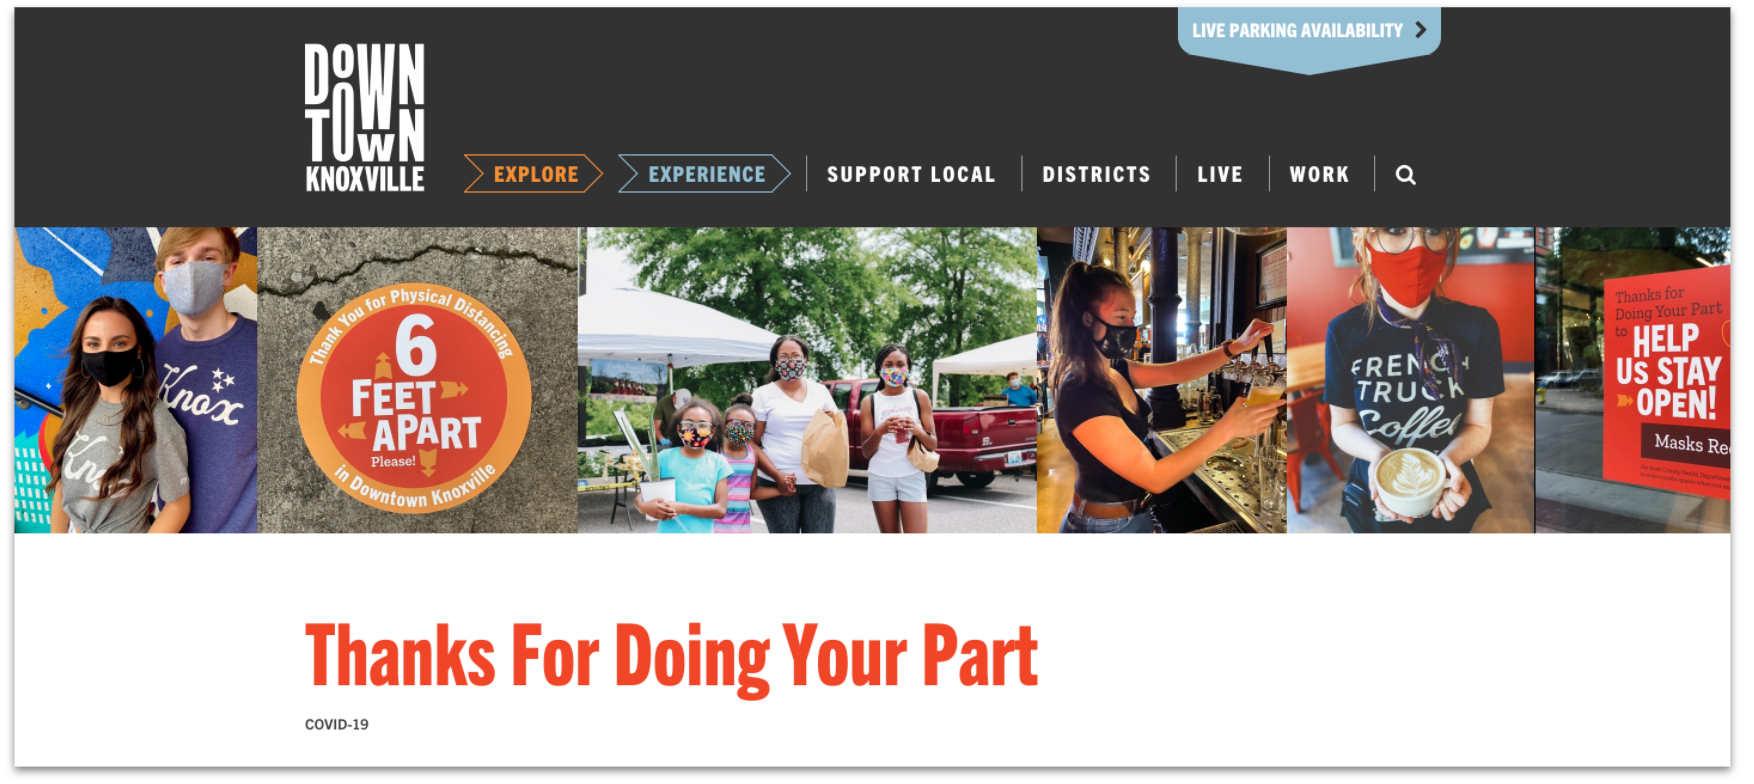 Downtown Knoxville Alliance website reminding people to support local